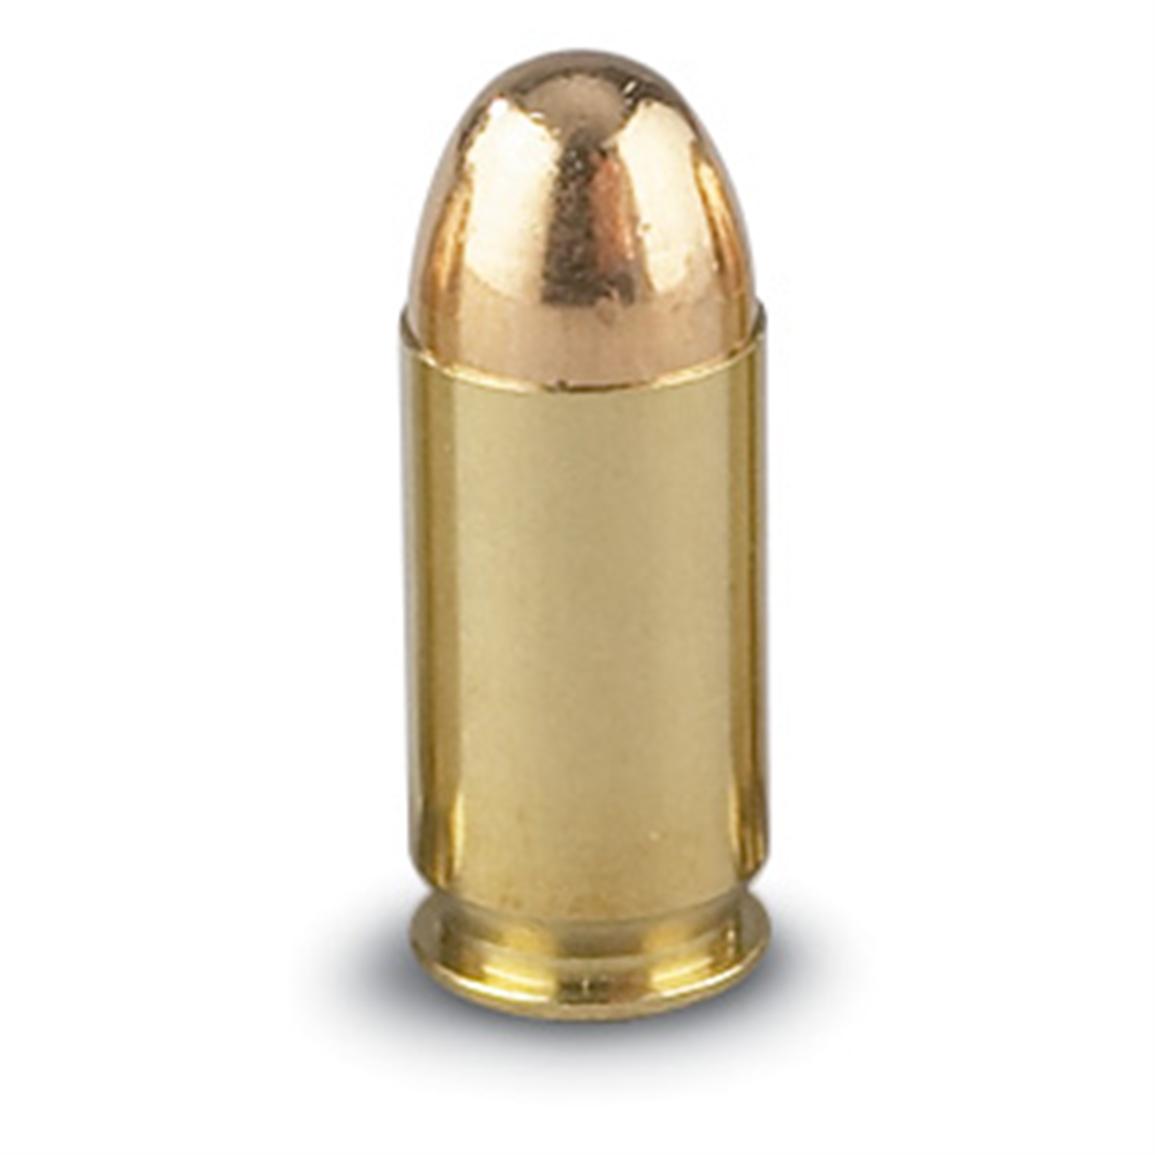 250 rds. of .45 ACP FMJ Ammo - 97268, .45 GAP Ammo at Sportsman's Guide